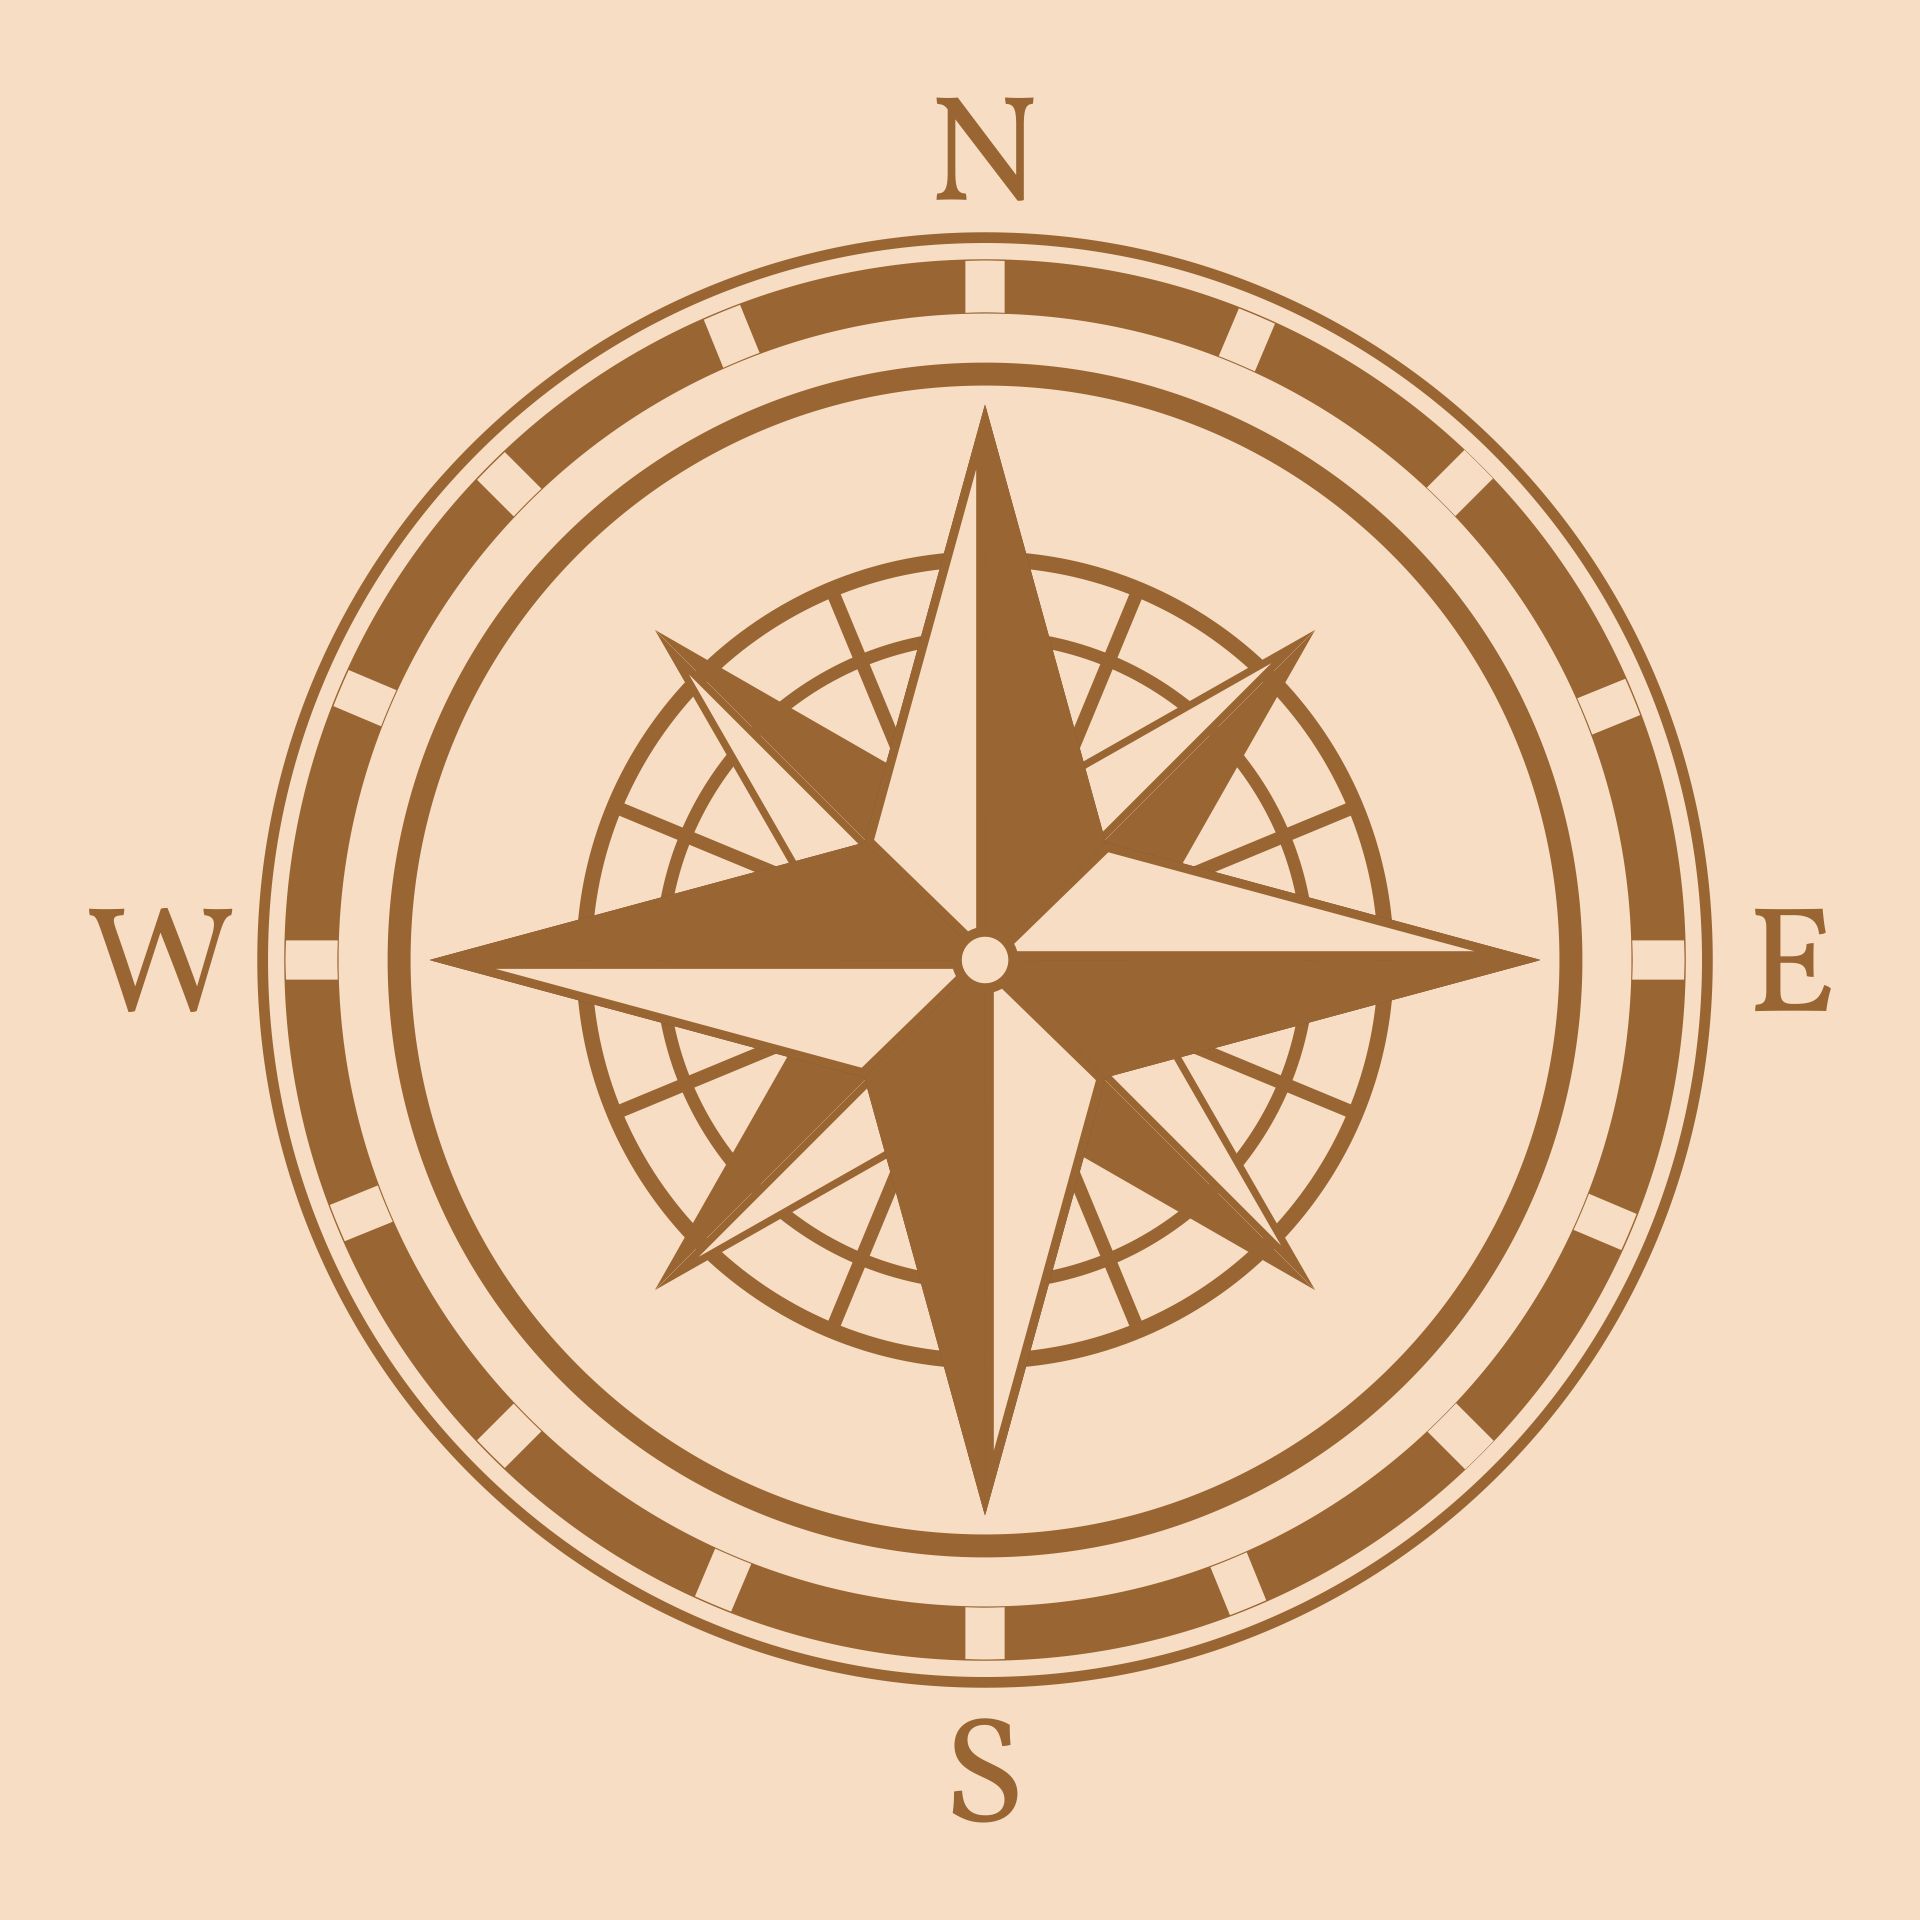 7-best-images-of-free-printable-compass-compass-rose-free-coloring